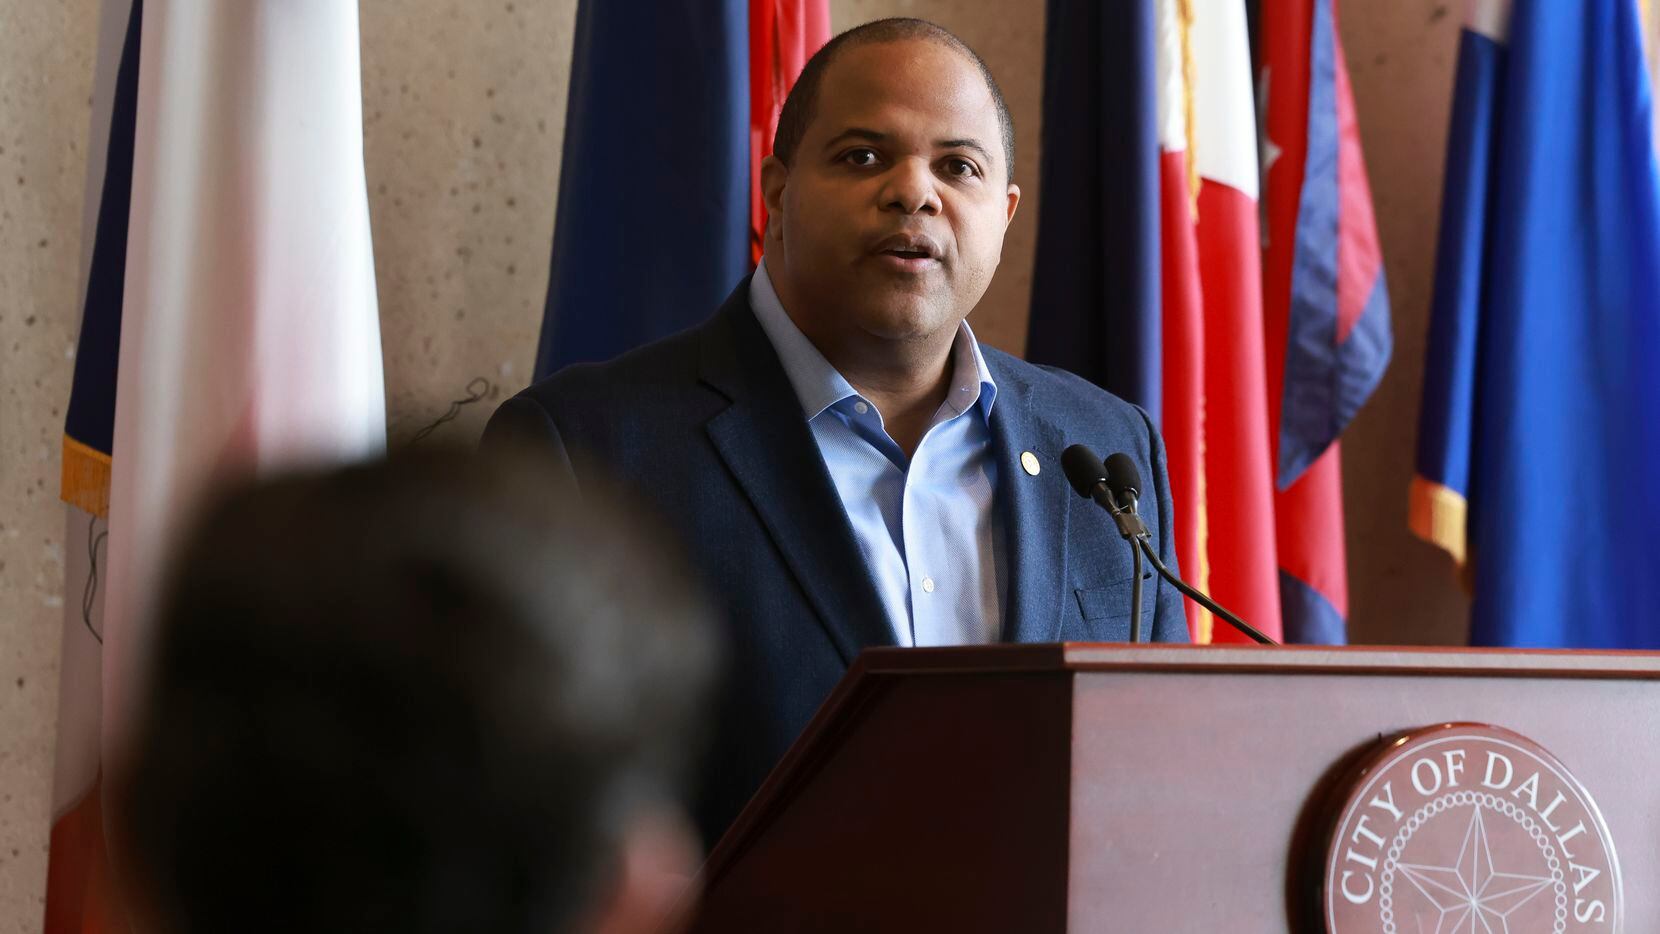 Mayor Eric Johnson speaks during a press conference at Dallas City Hall on Feb. 16, 2023.